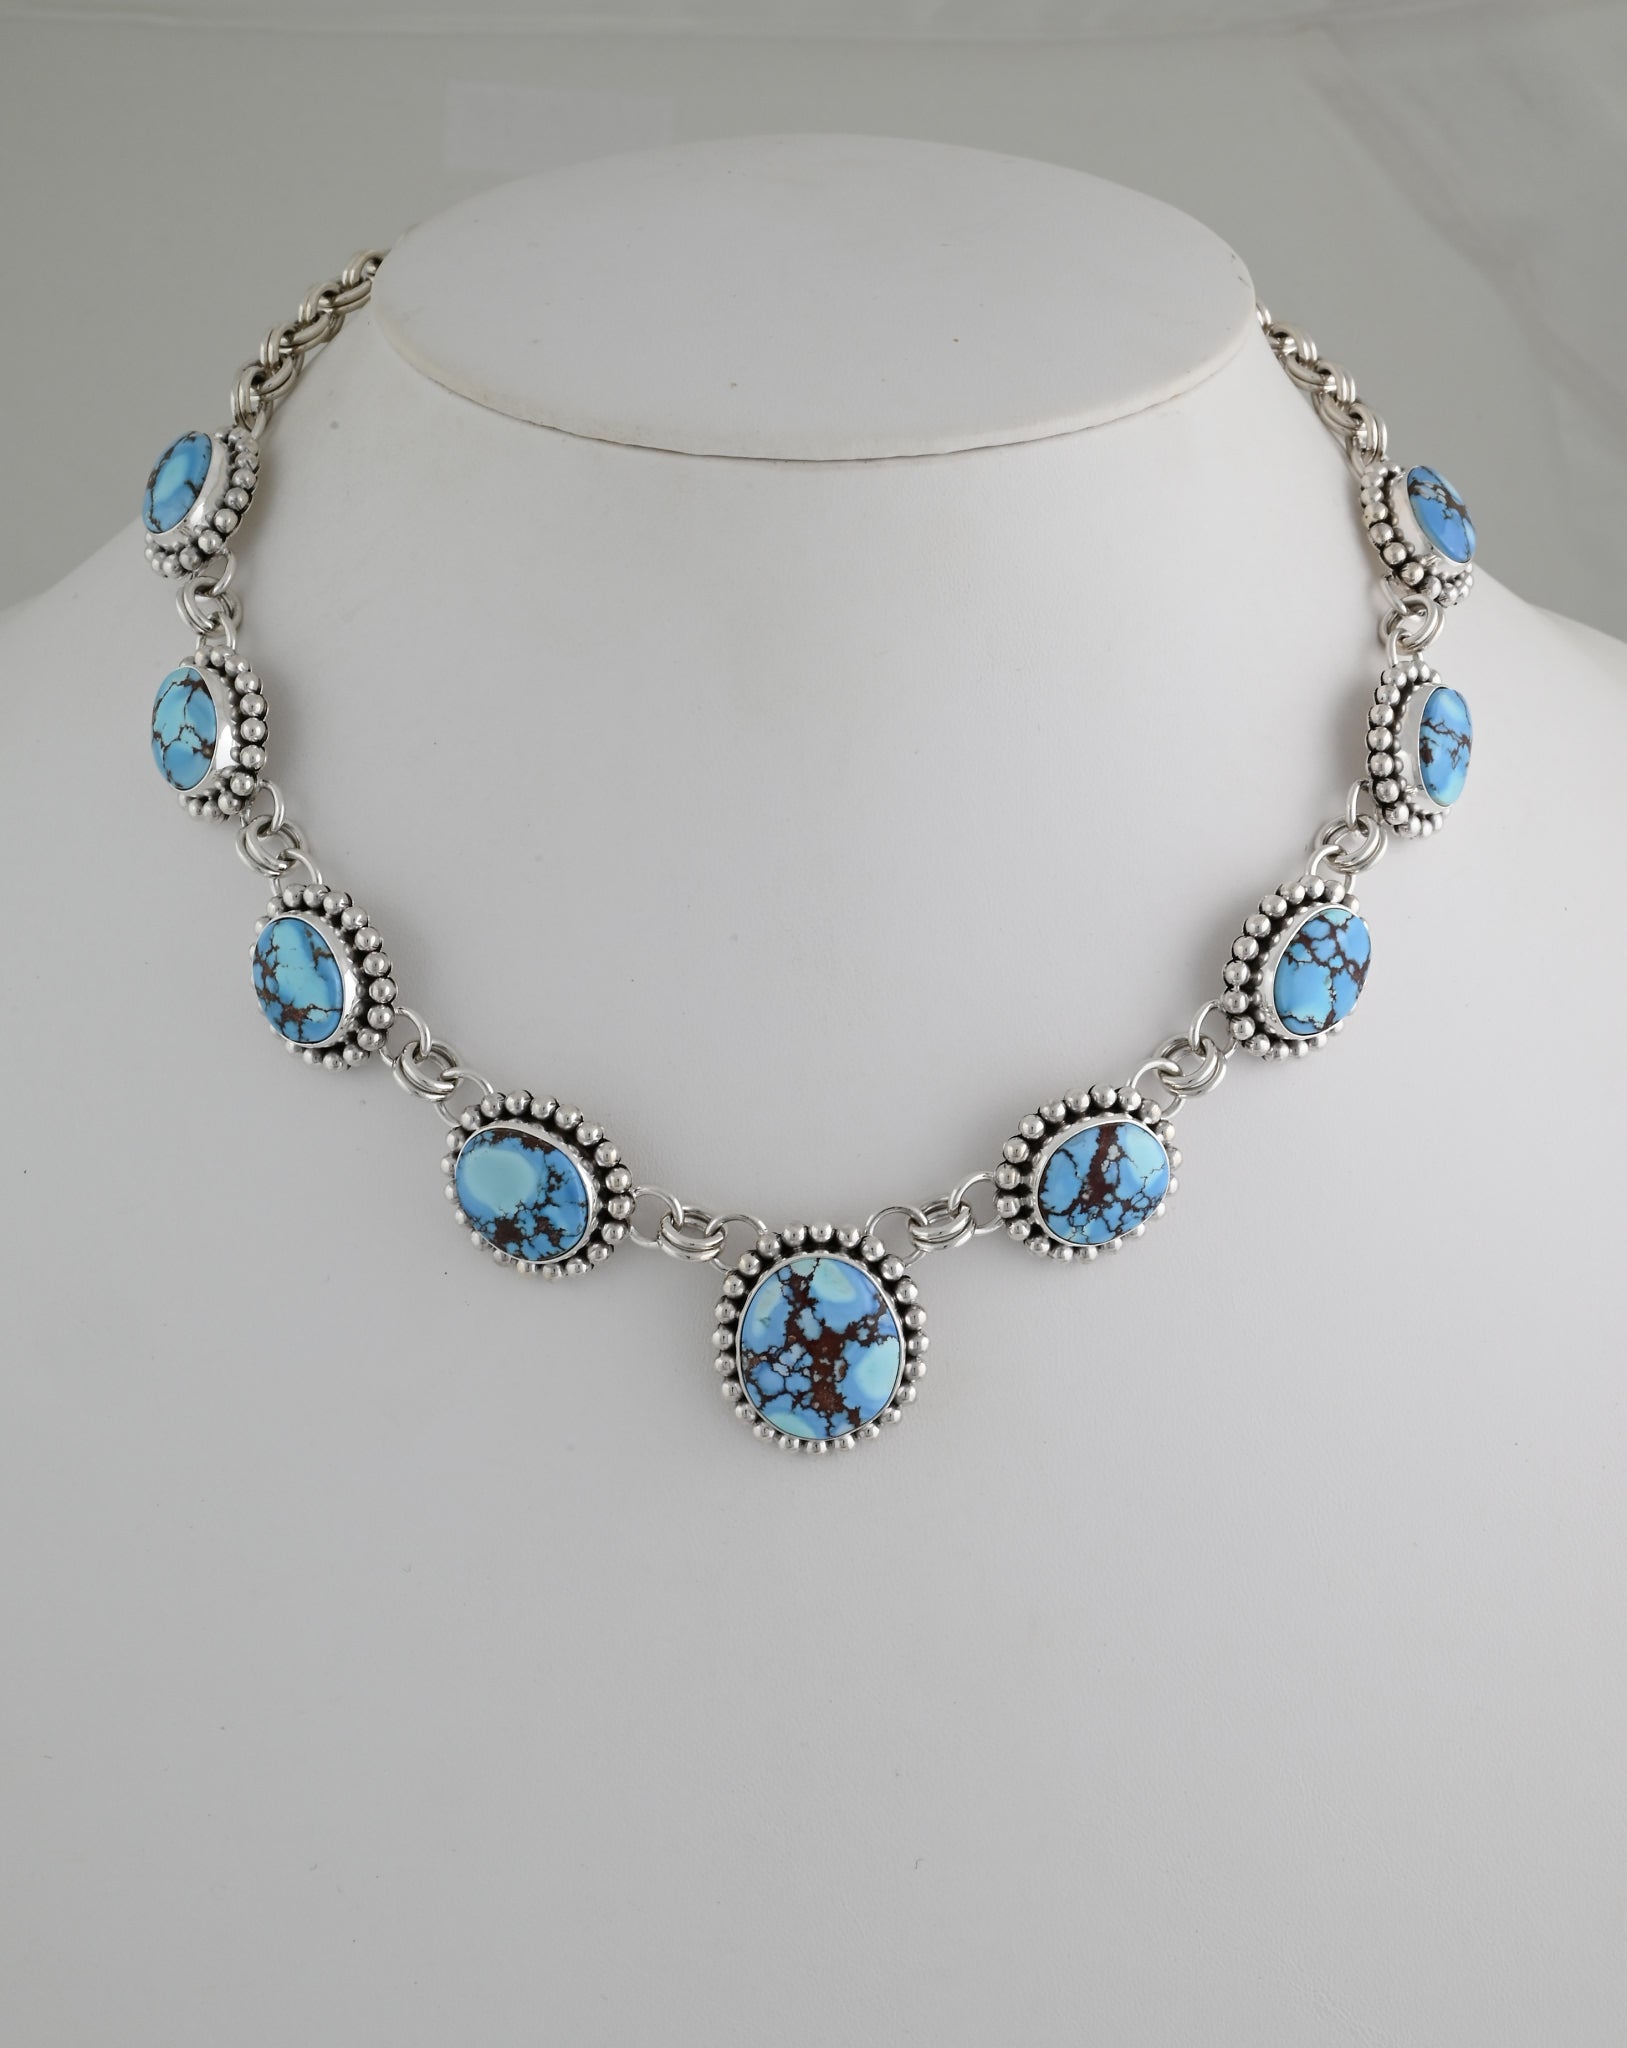 Necklace with Nine Stones of Golden Hills Turquoise by Artie Yellowhorse